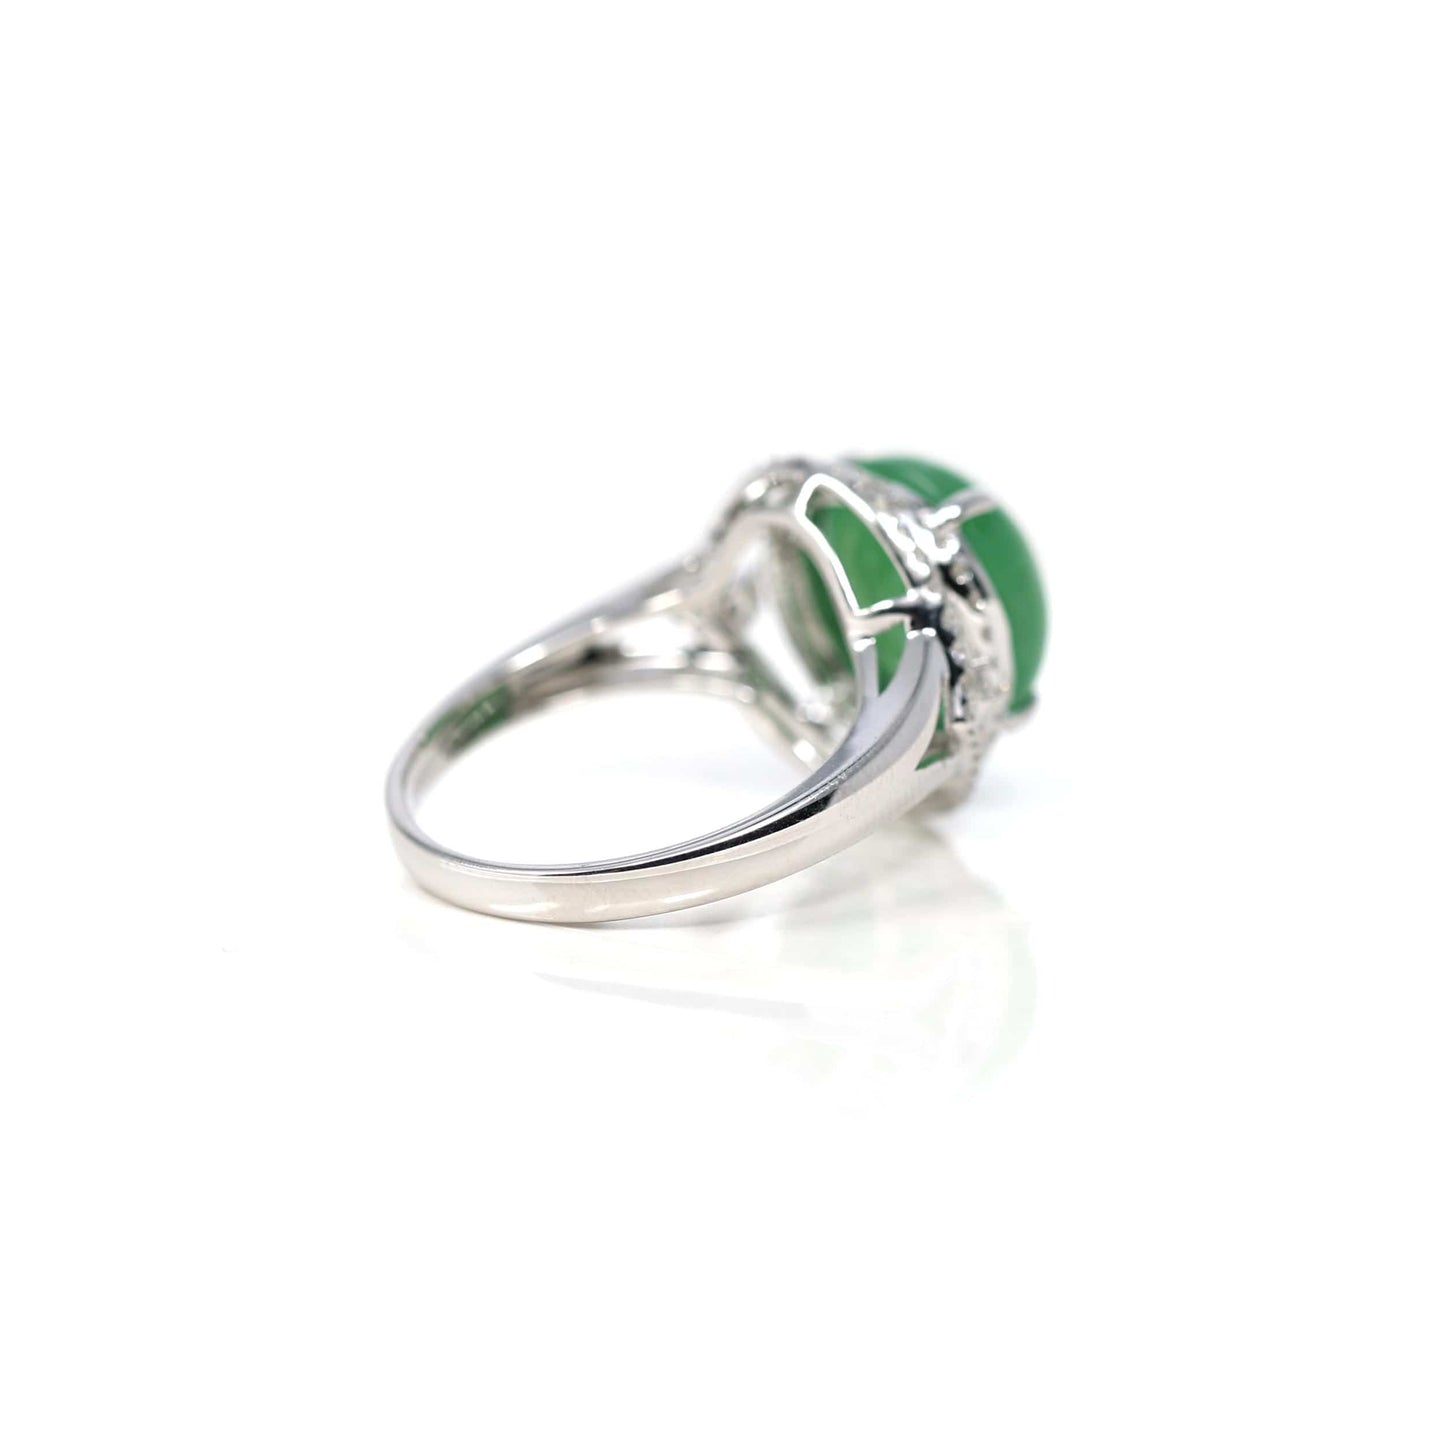 Load image into Gallery viewer, RealJade¨ Co. Jadeite Engagement Ring 18k White Gold Natural Imperial Green Oval Jadeite Jade Engagement Ring With Diamonds
